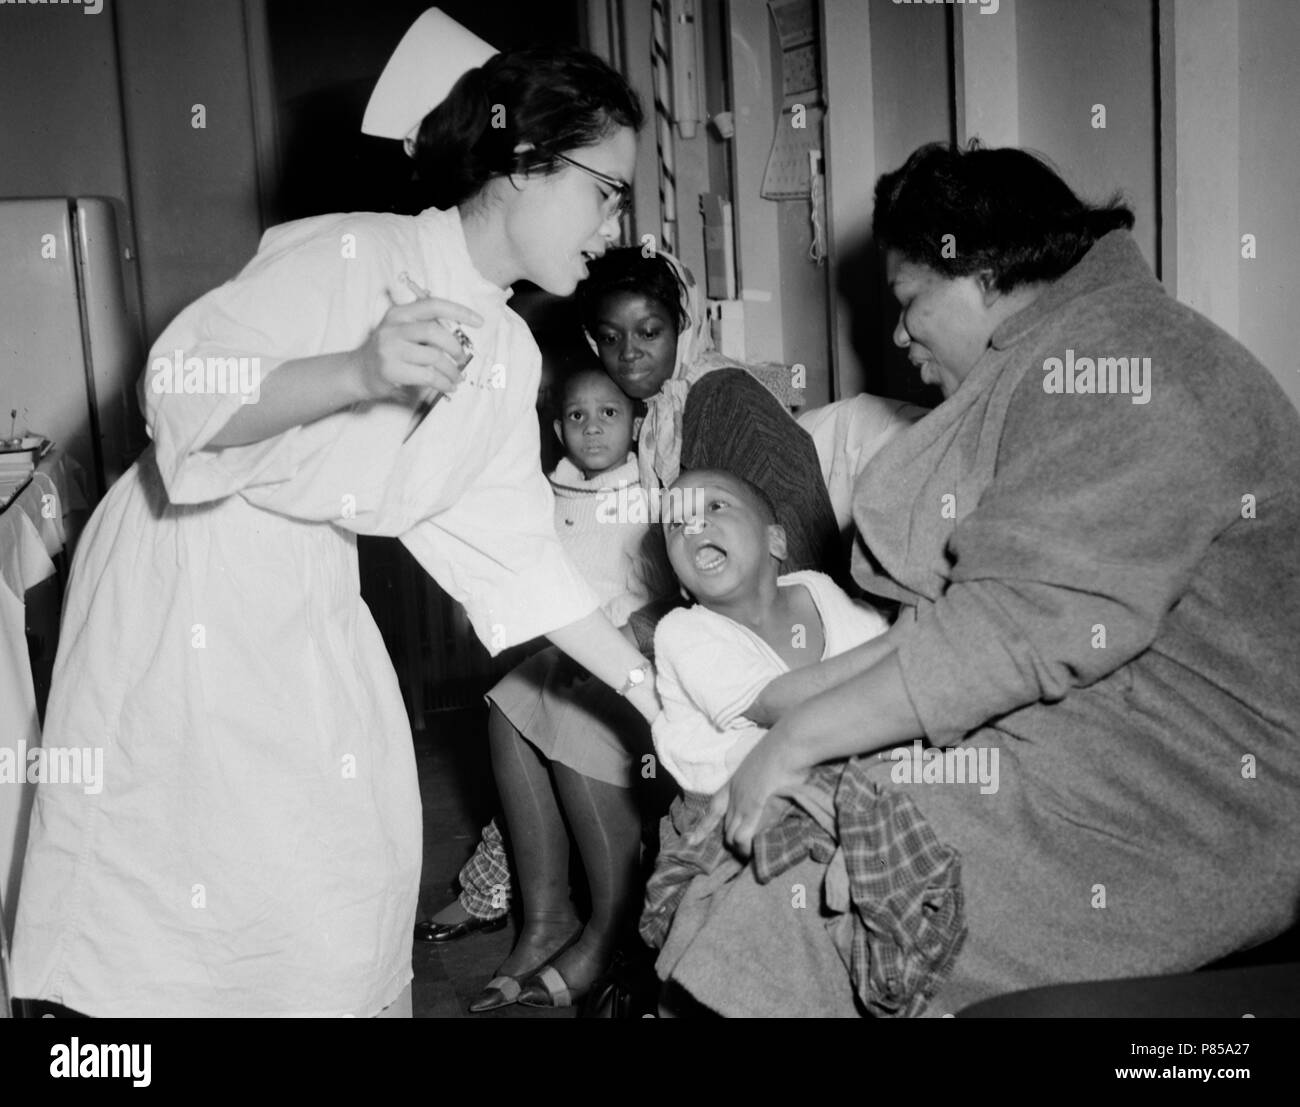 A nurse attempts to give a young child a flu shot in Chicago, ca.1962. Stock Photo